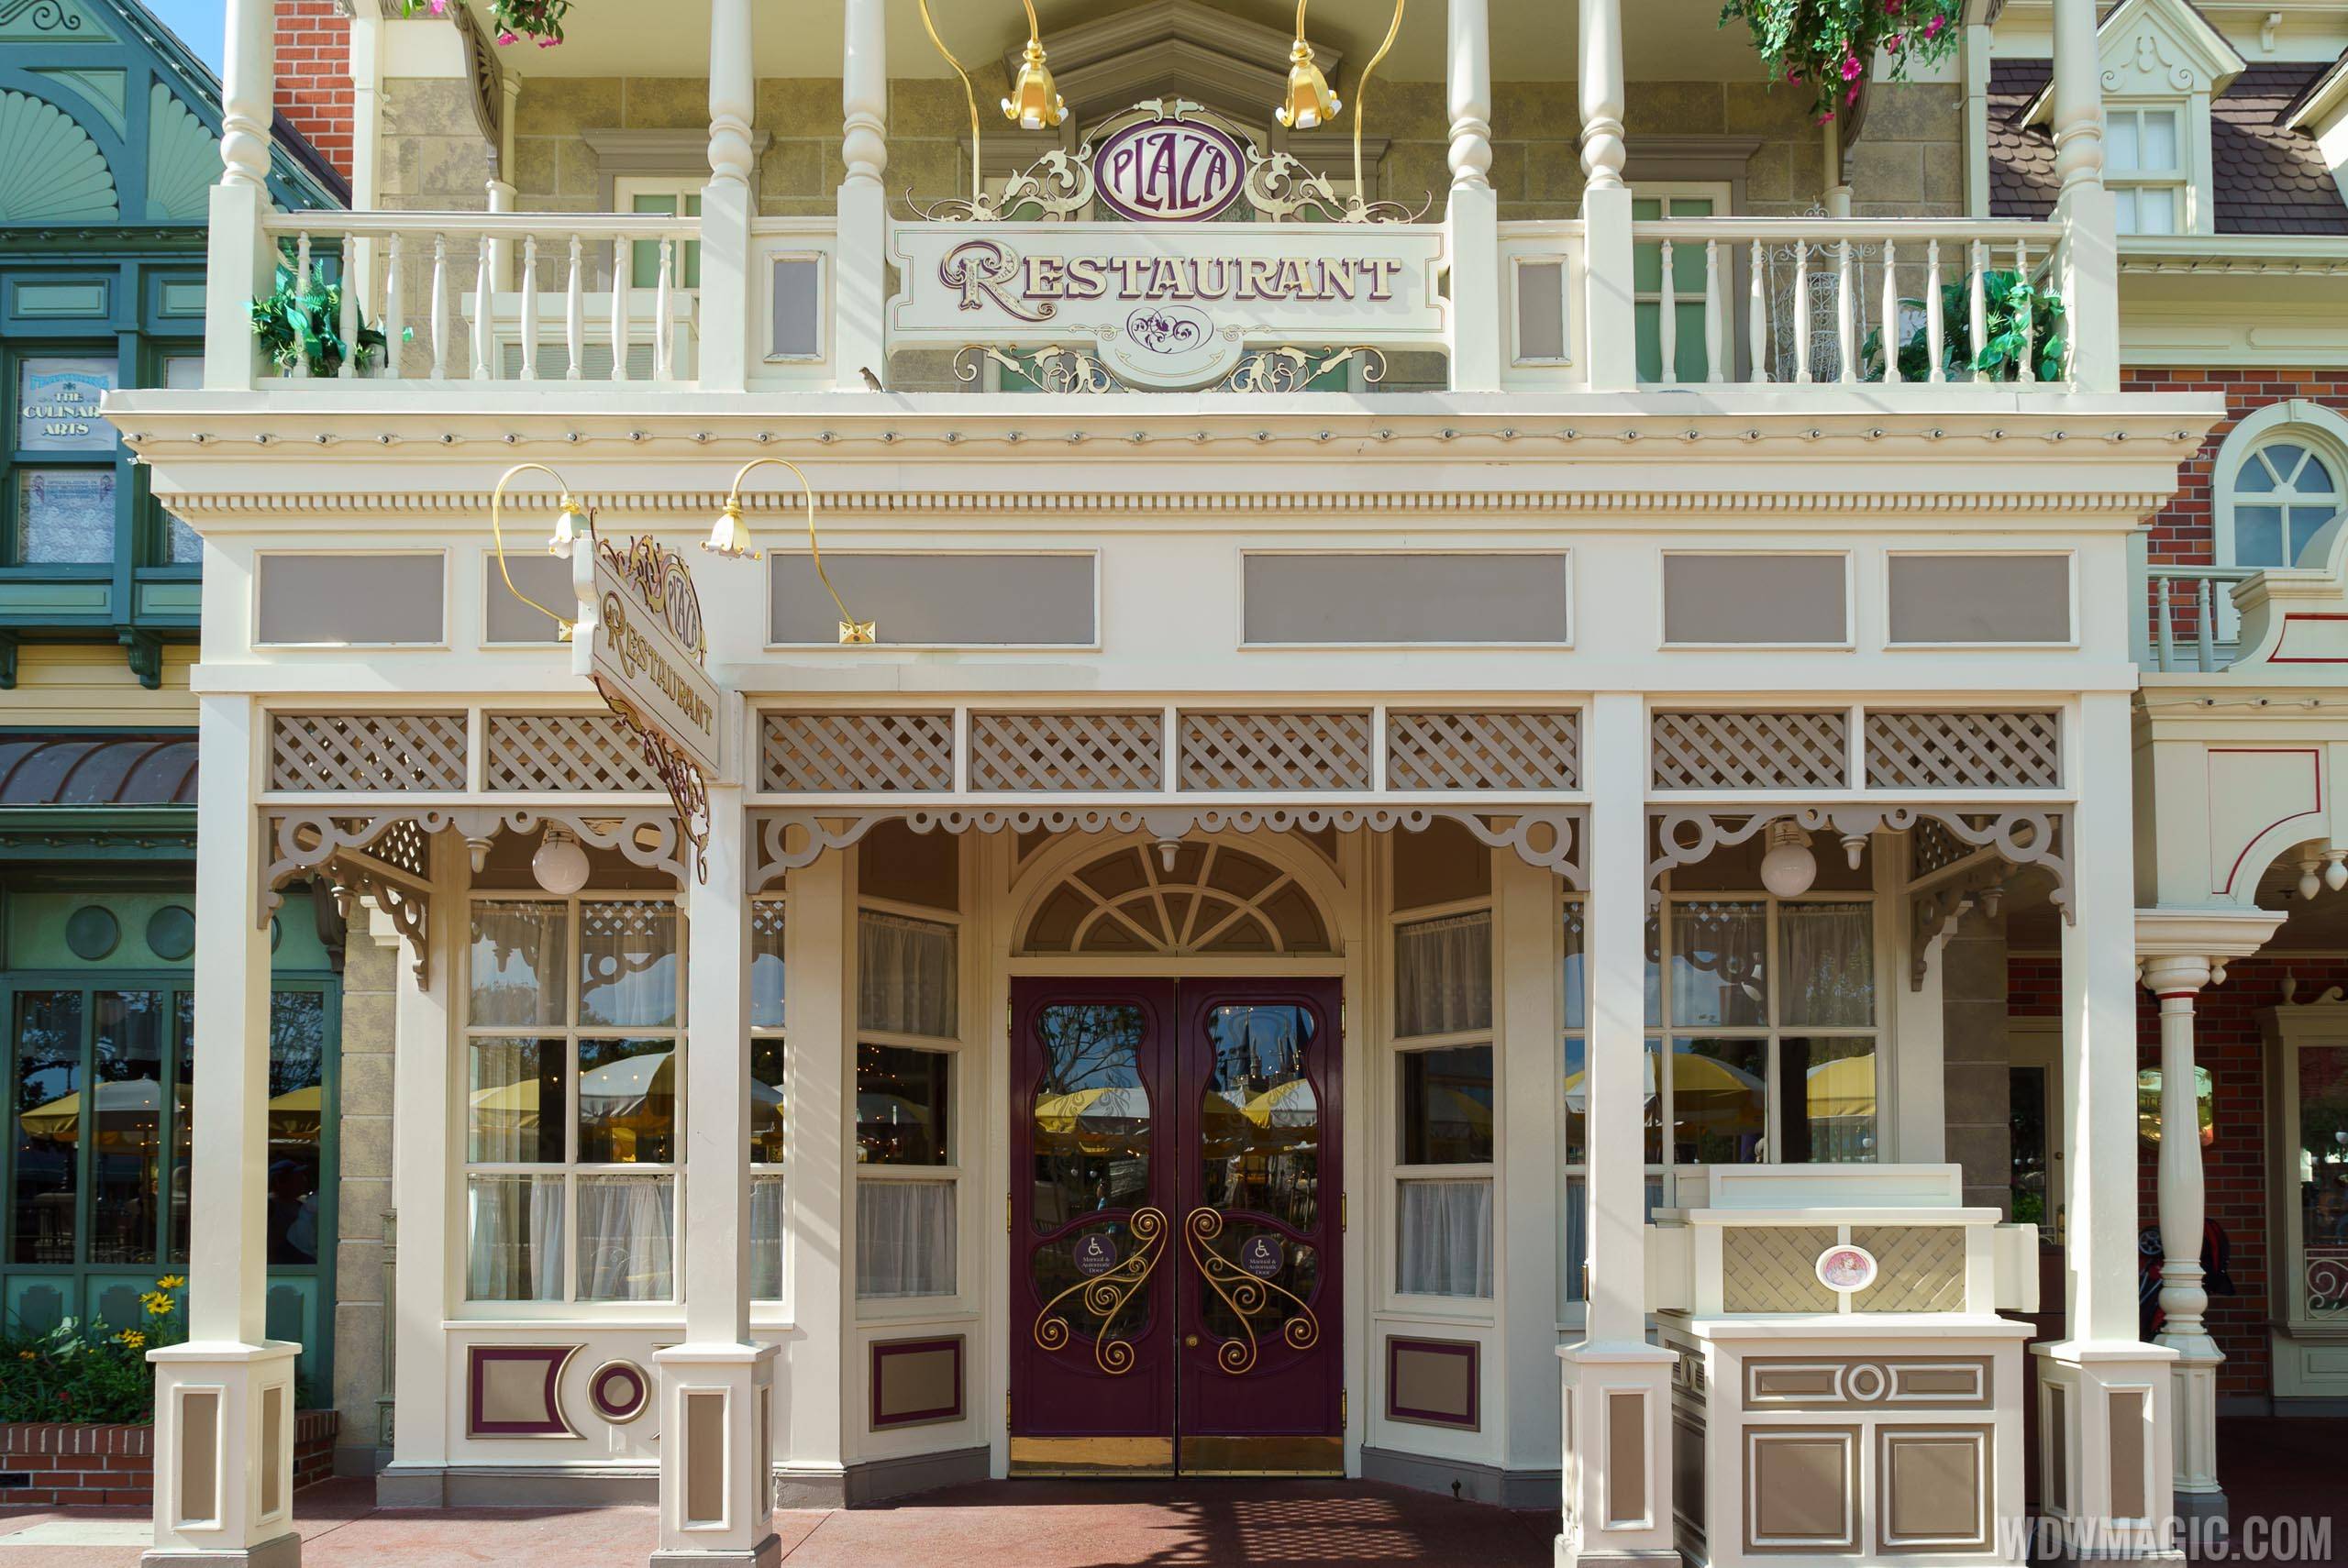 PHOTOS - The Plaza Restaurant to offer breakfast at the Magic Kingdom